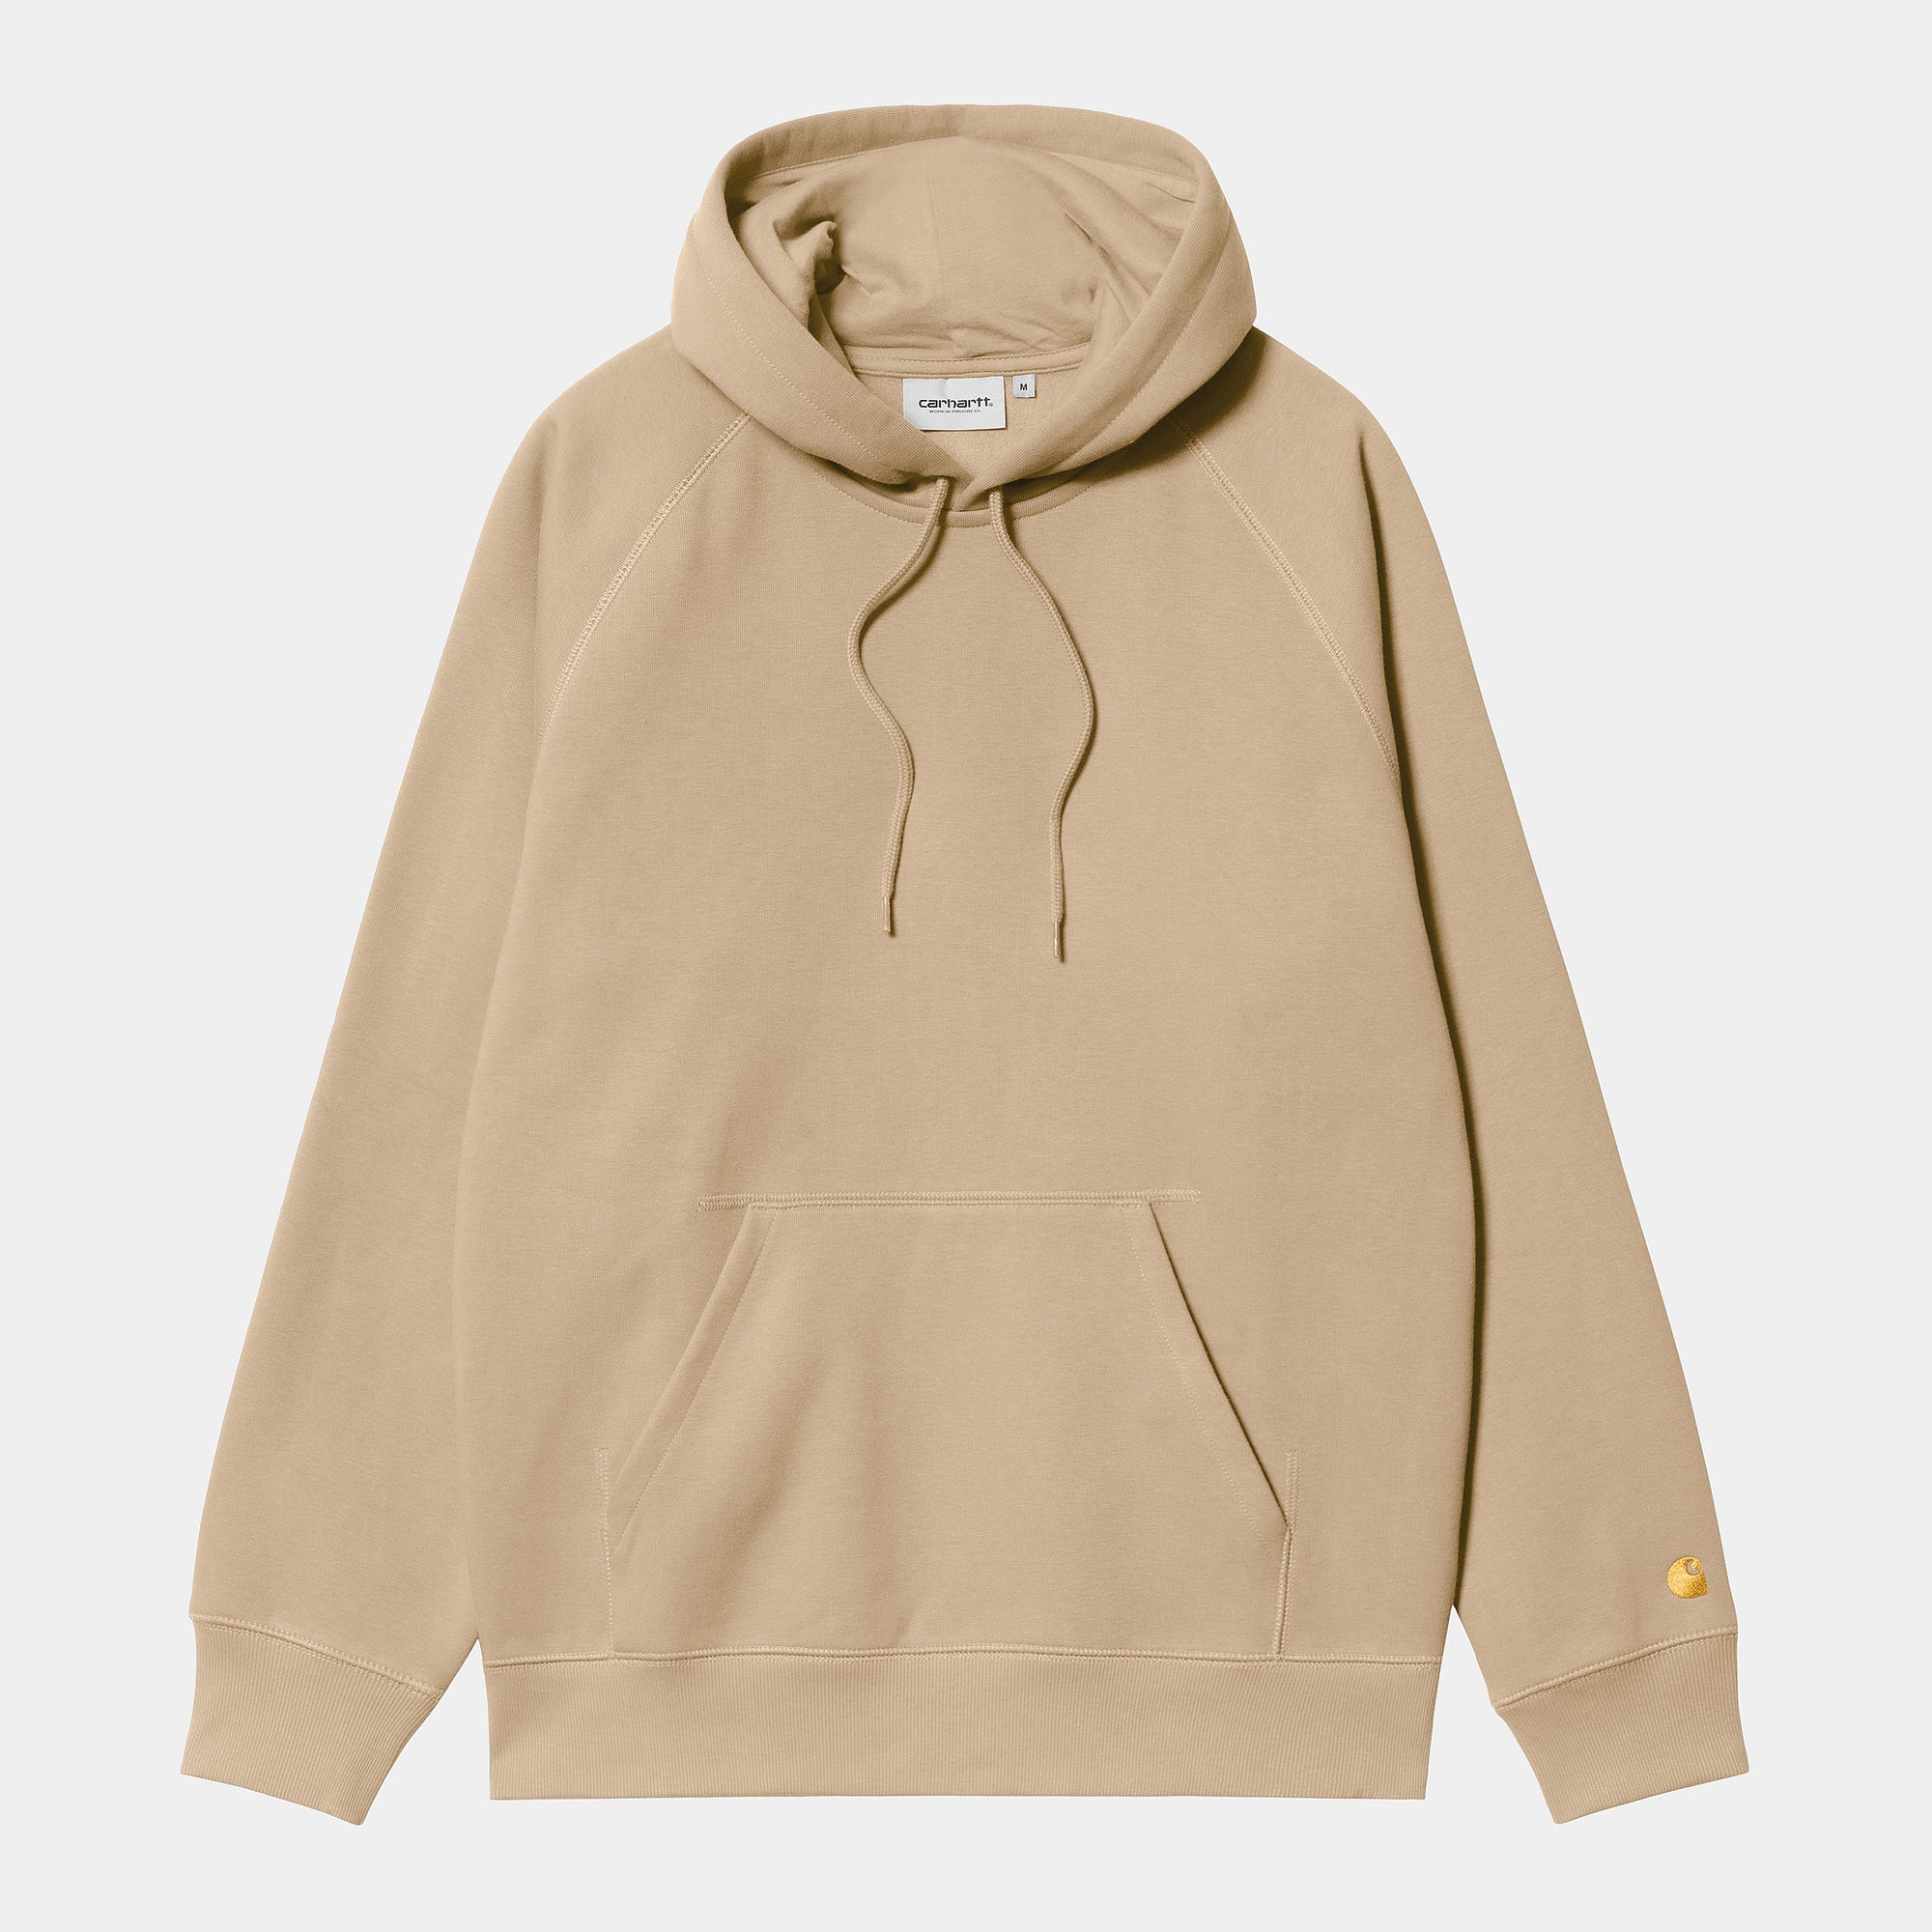 Carhartt WIP - Chase Pullover Hooded Sweatshirt - Sable / Gold